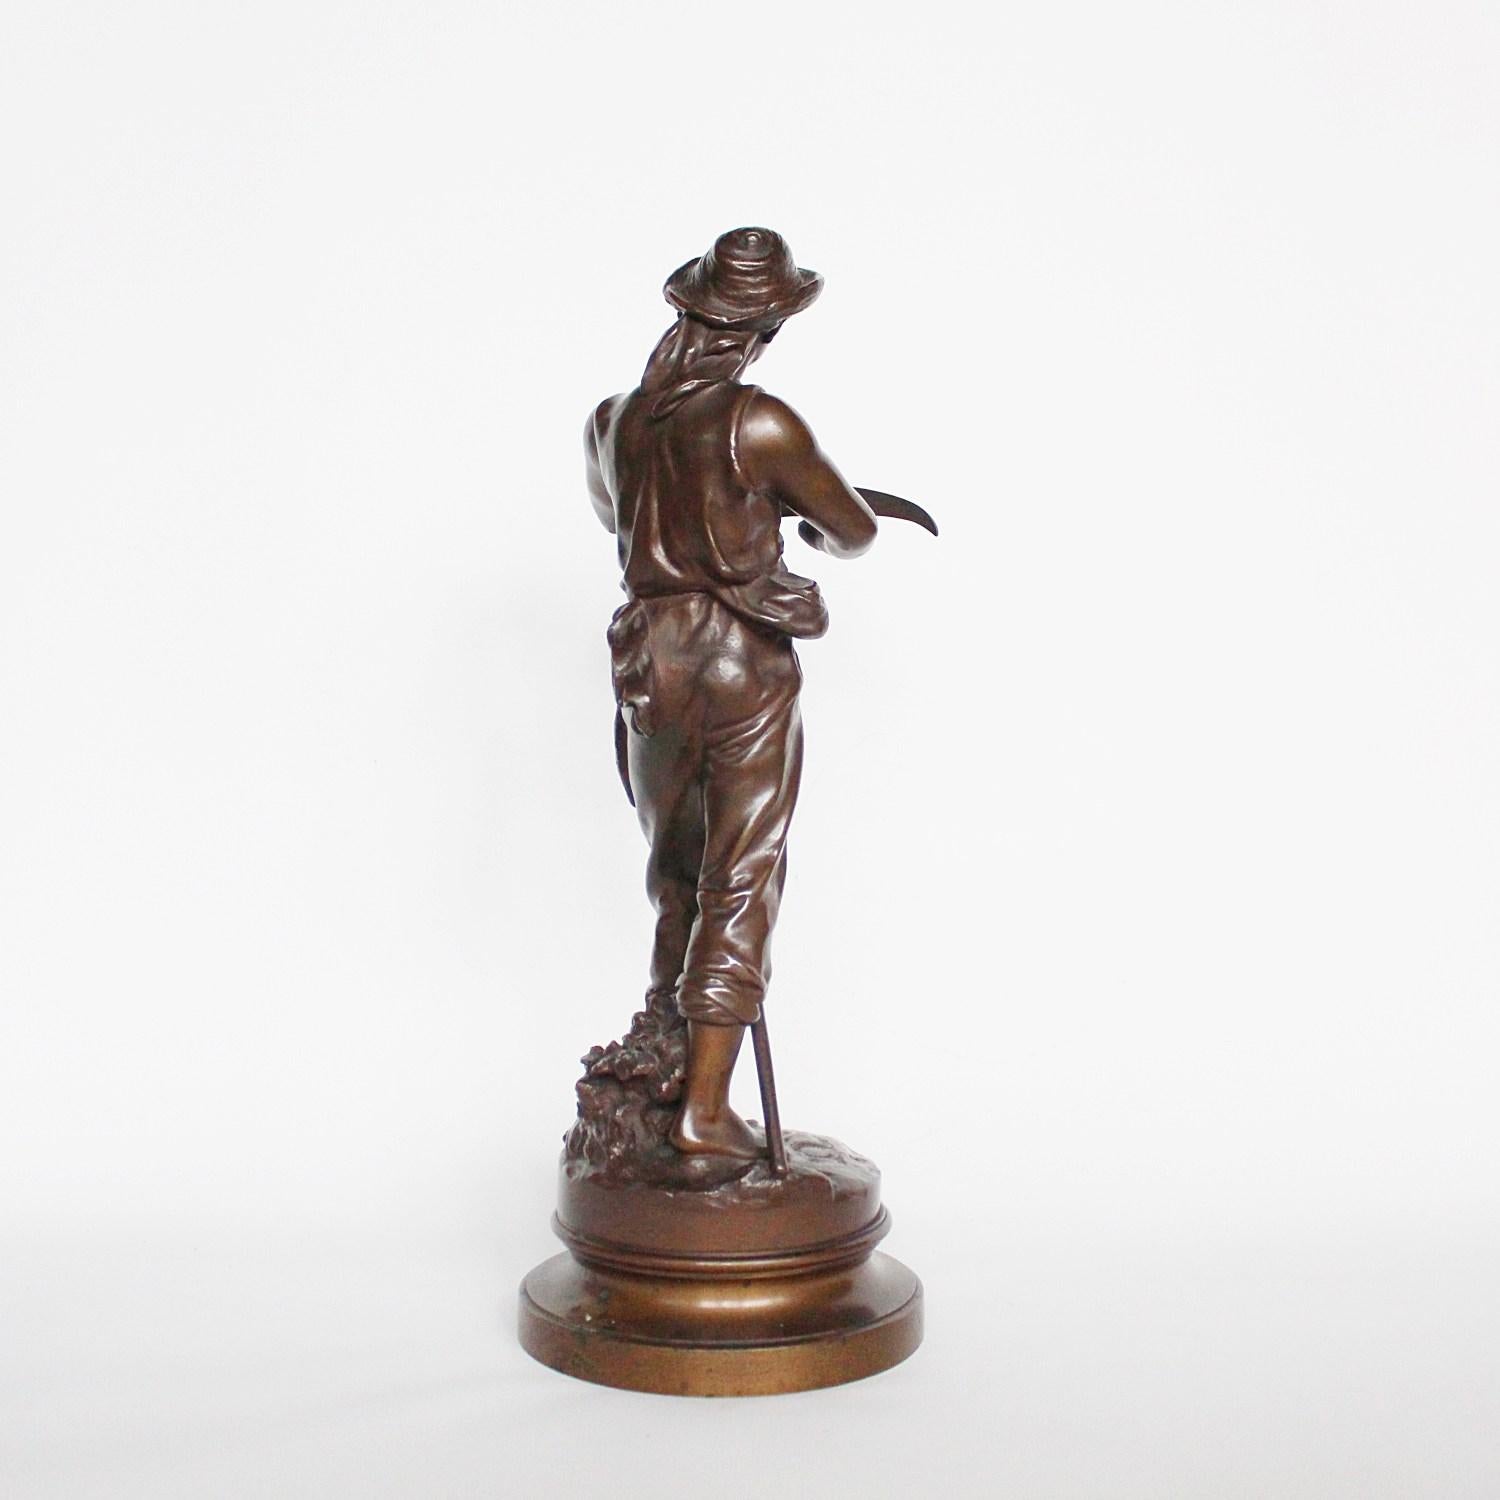 French Art Nouveau Bronze Sculpture by Mathurin Moreau Signed and Stamped, circa 1890